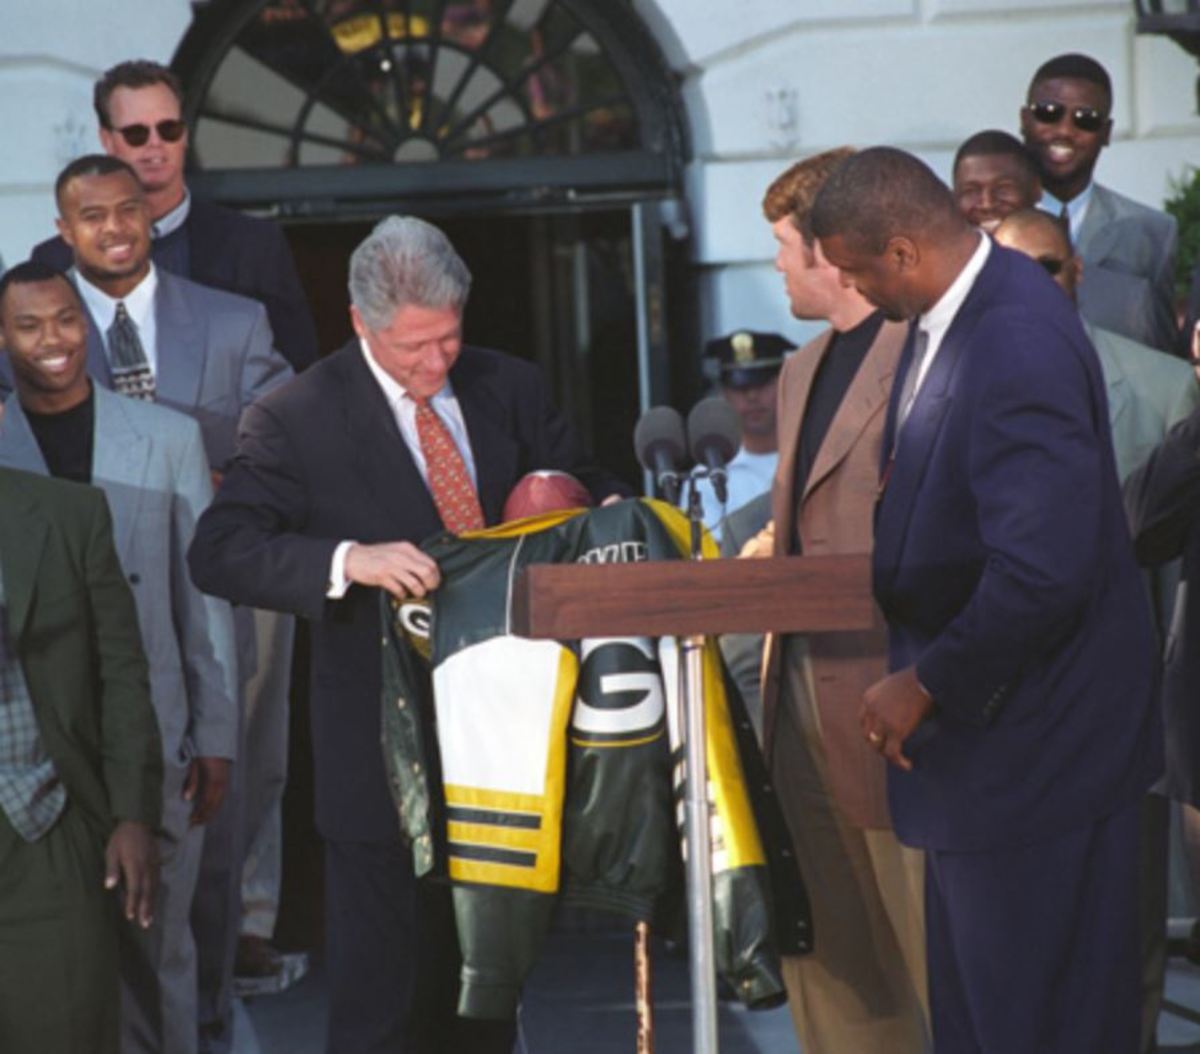 Reggie White and Brett Favre presenting a Green Bay Packers jacket to President Clinton after winning Superbowl XXXI